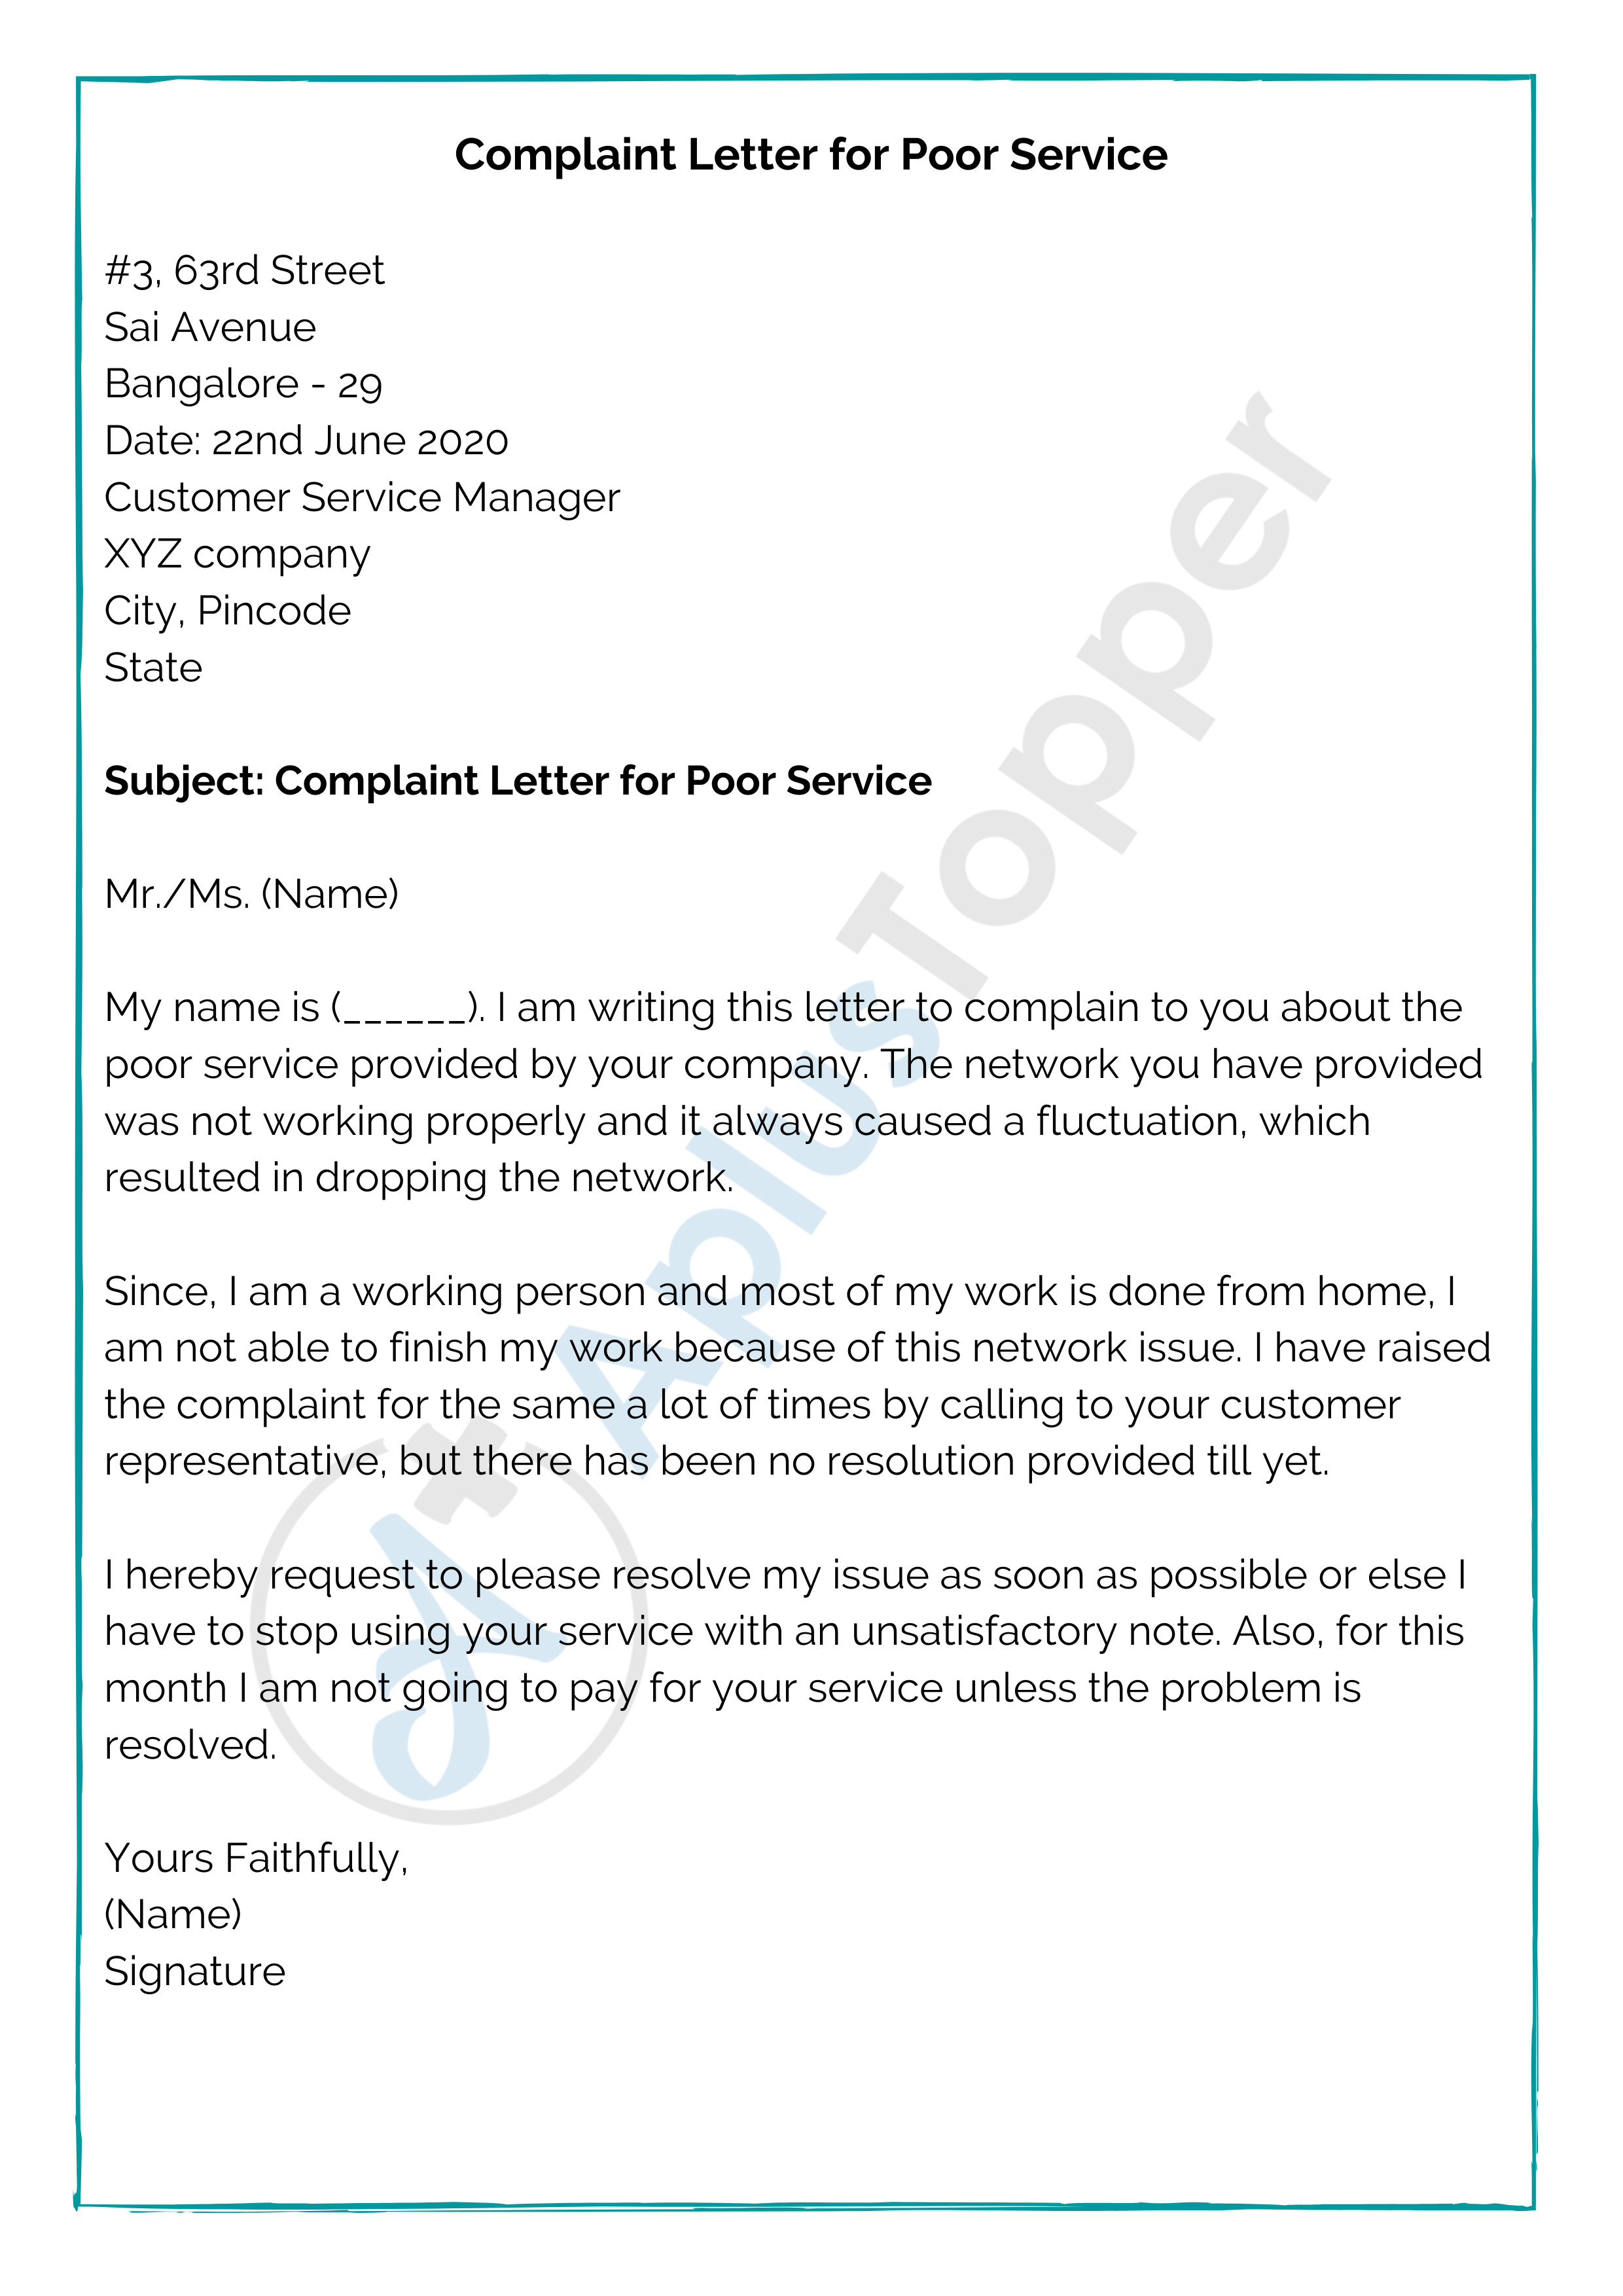 Complaint Letter Format  Samples, How to Write a Complaint Letter